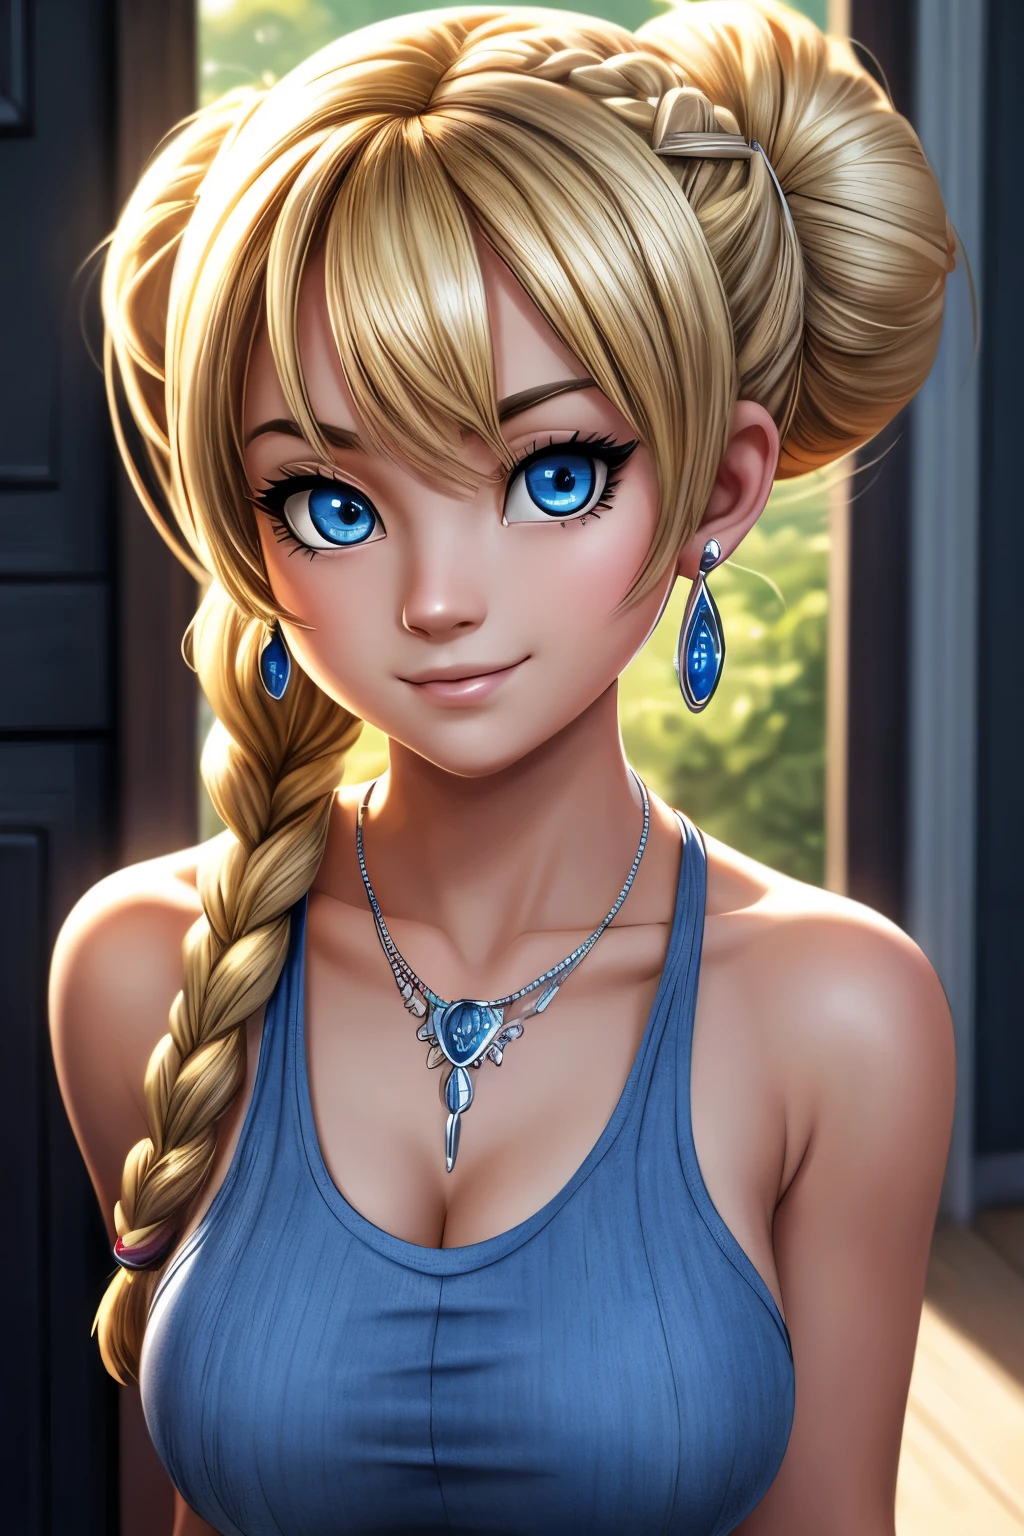 ((ultra quality)), ((tmasterpiece)), gnome girl, Short stature, ((blonde woman, hairlong, braided)), (silver ear rings), (silver necklace around the neck), (Beautiful cute face), (beautiful female lips), Charming, ((sexy facial expression)), looking at the camera smiling softly, eyes are slightly closed, (Skin color: white), Body glare, ((detailed beautiful female eyes)), ((dark blue eyes)), (juicy female lips), (beautiful female hands), (A bit full figure, bun), ((perfect female figure)), perfect female body, Beautiful waist, Gorgeous hips, Beautiful medium breasts, ((Subtle and beautiful)), seductively worth it (close-up of the face), (wearing blackface jeans, white tanktop) background: on the threshold of the house, Hot day, ((Depth of field)), ((high quality clear image)), (crisp details), ((higly detailed)), Realistic, Professional Photo Session, ((Clear Focus)), the anime